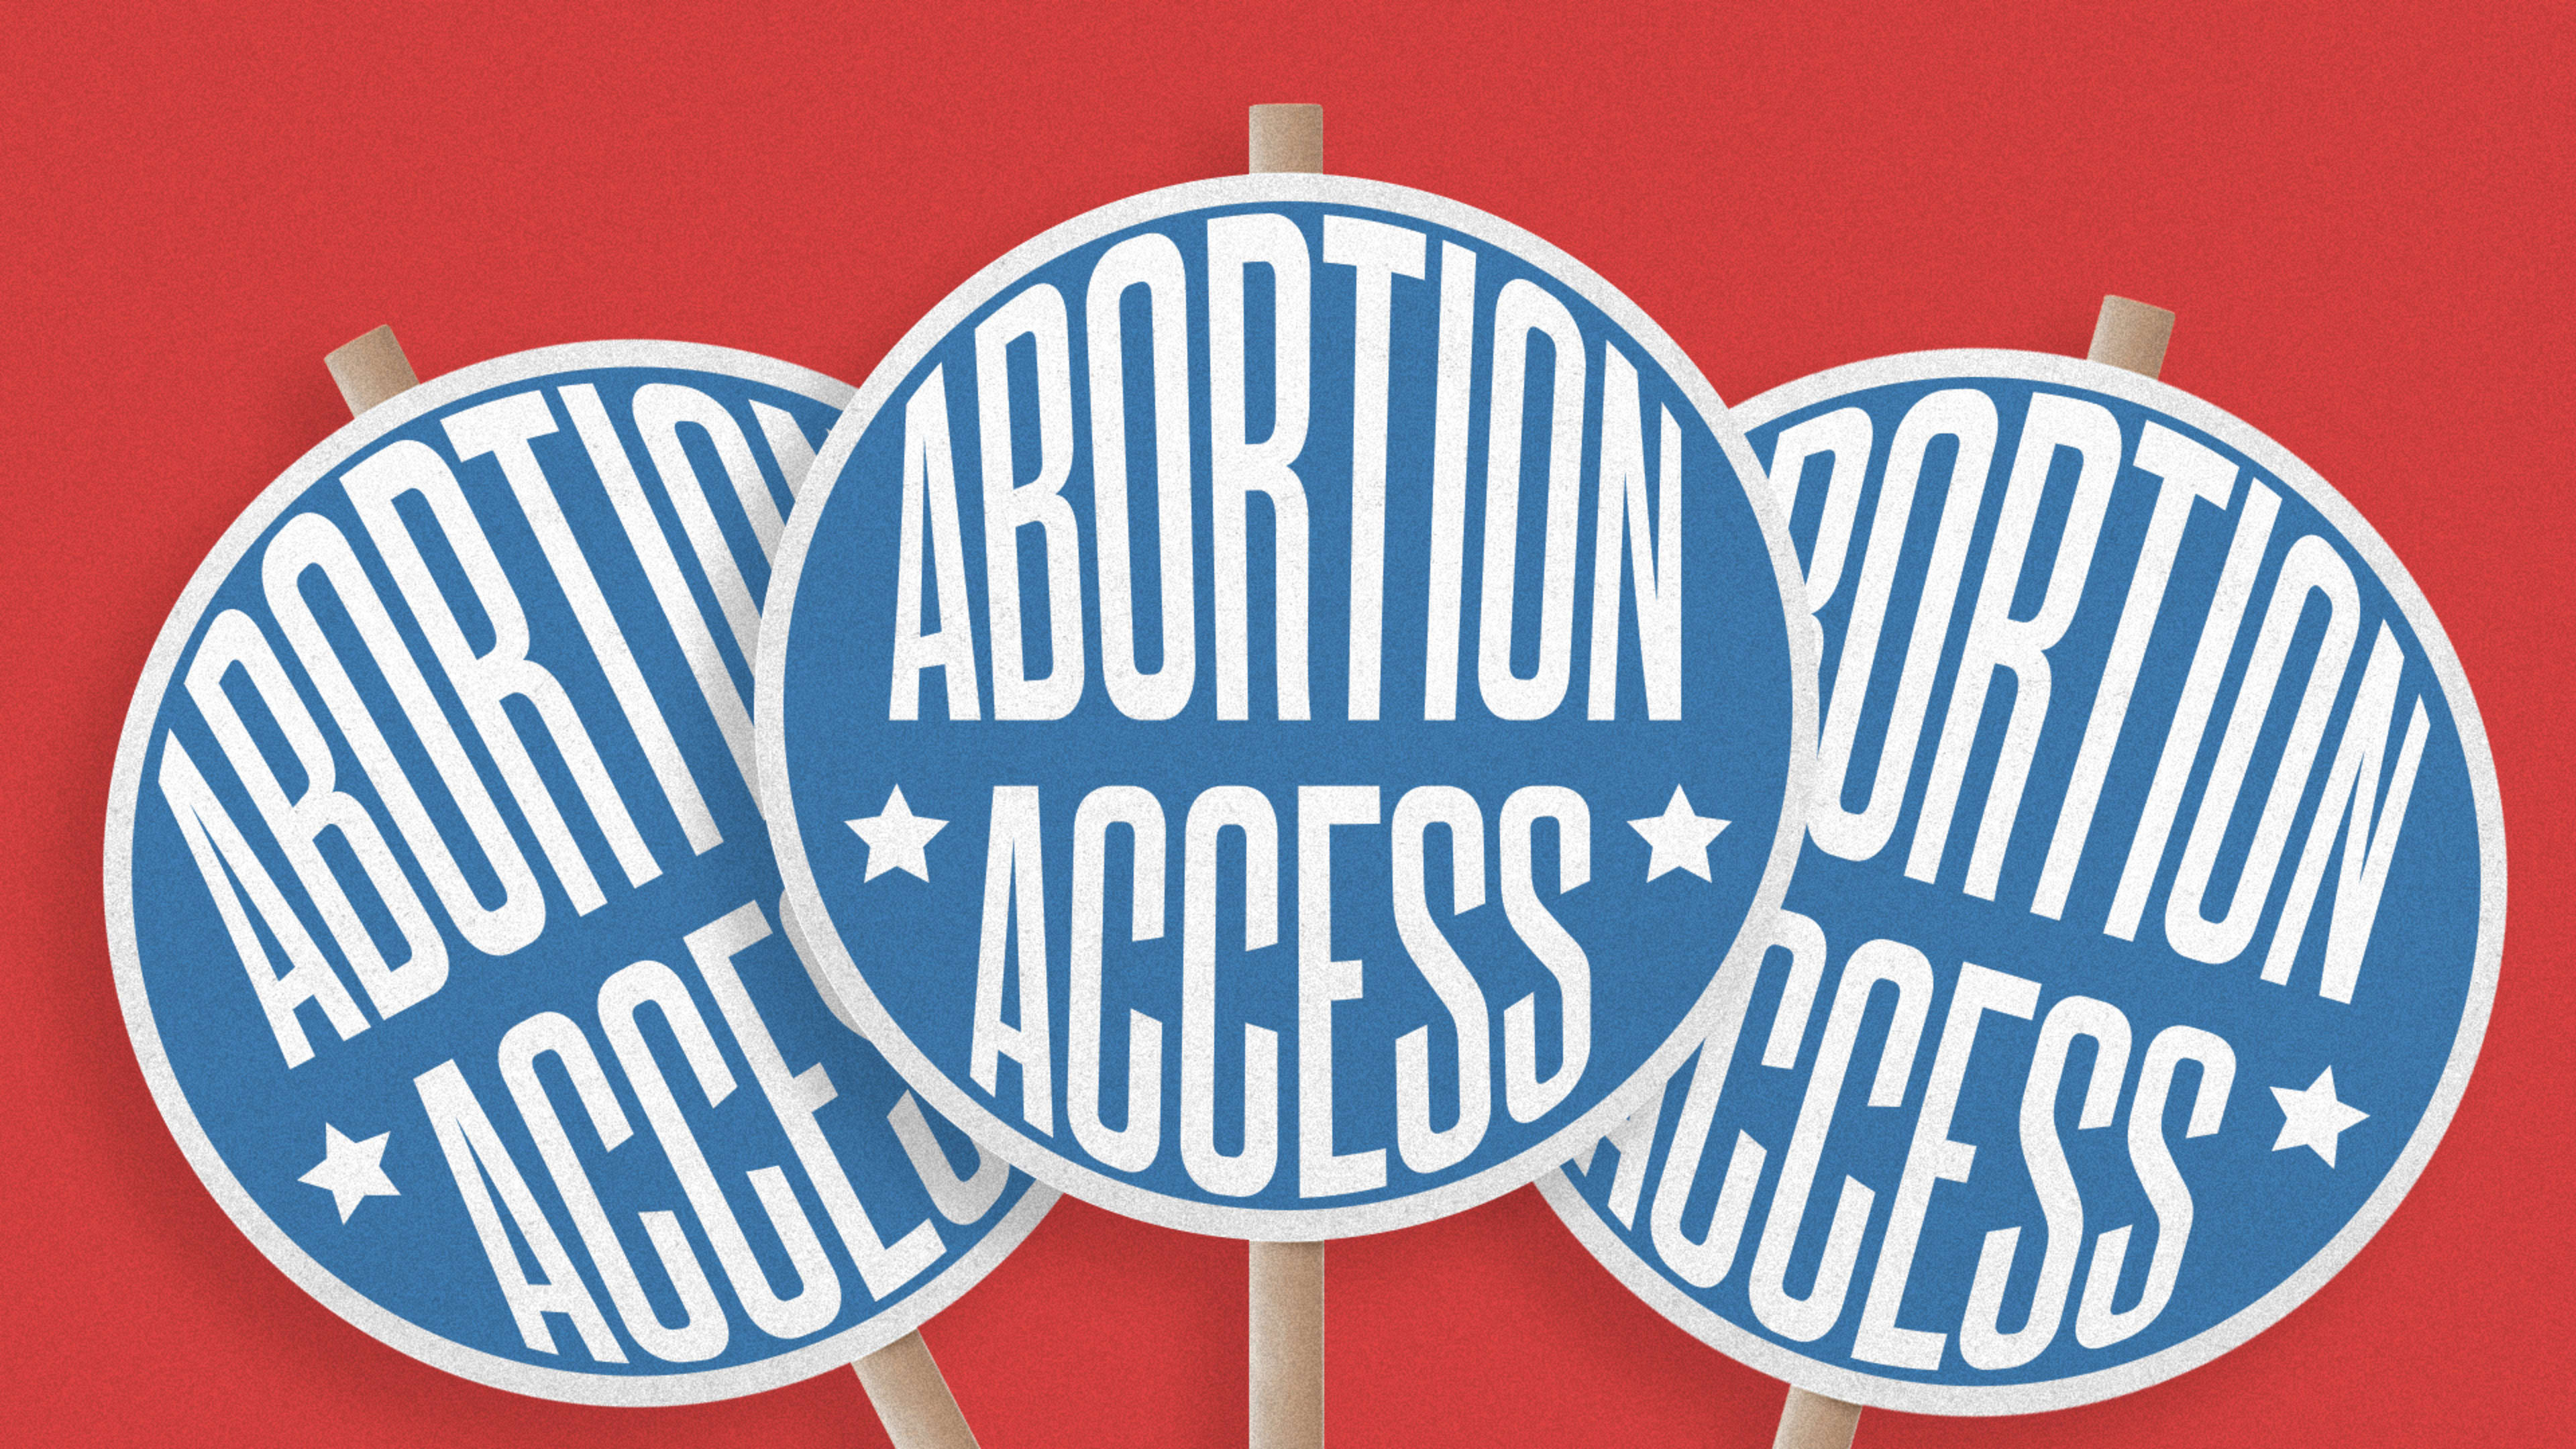 Women in tech are mobilizing to improve access to abortion providers